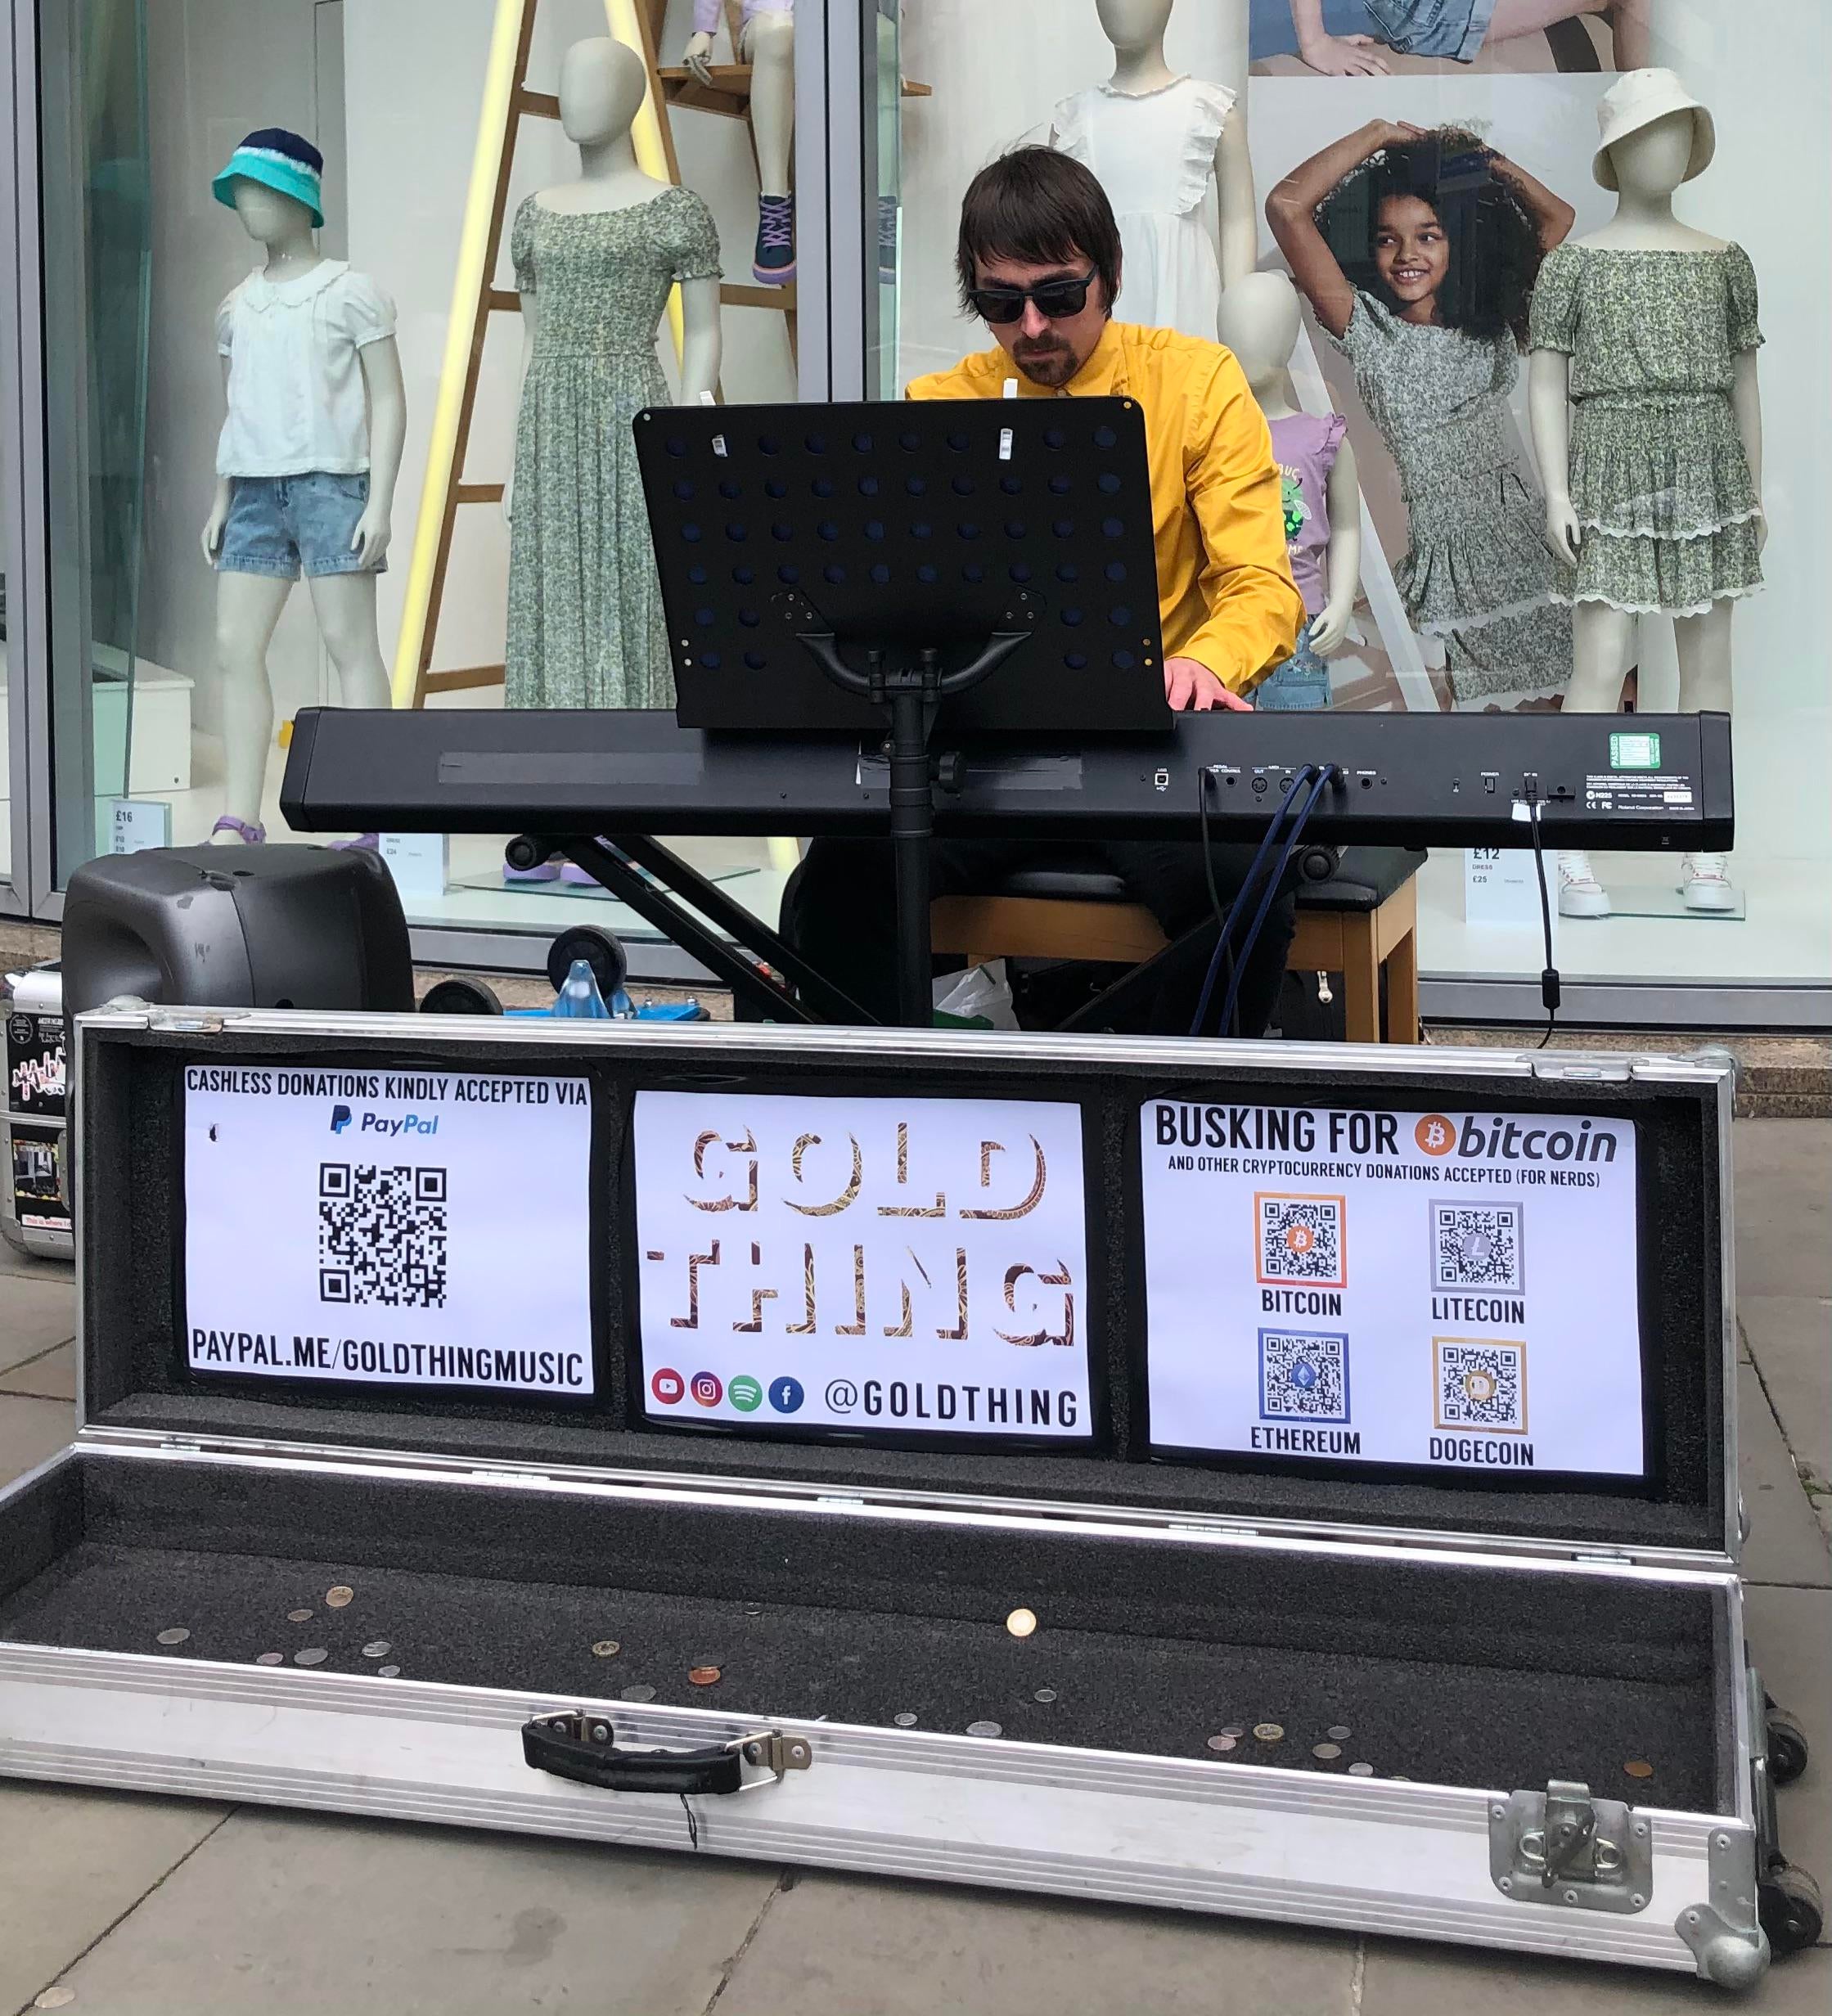 901v17et54u61 Busking for Bitcoin: Report Finds Street Performers Depend on Digital Payments